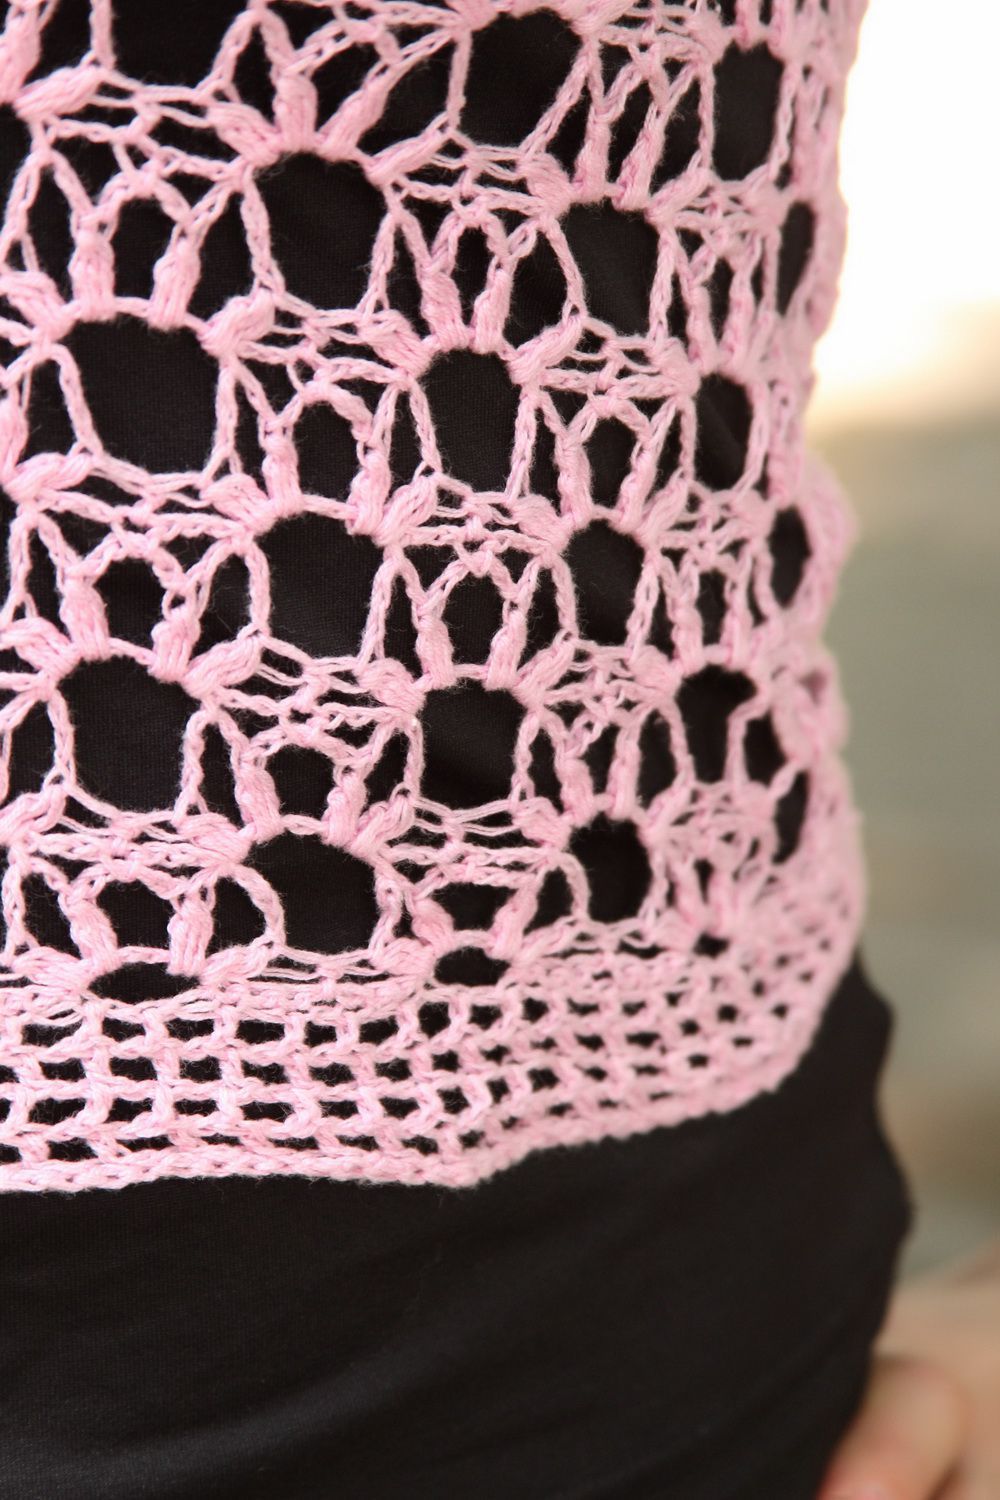 Crocheted cotton top photo 3